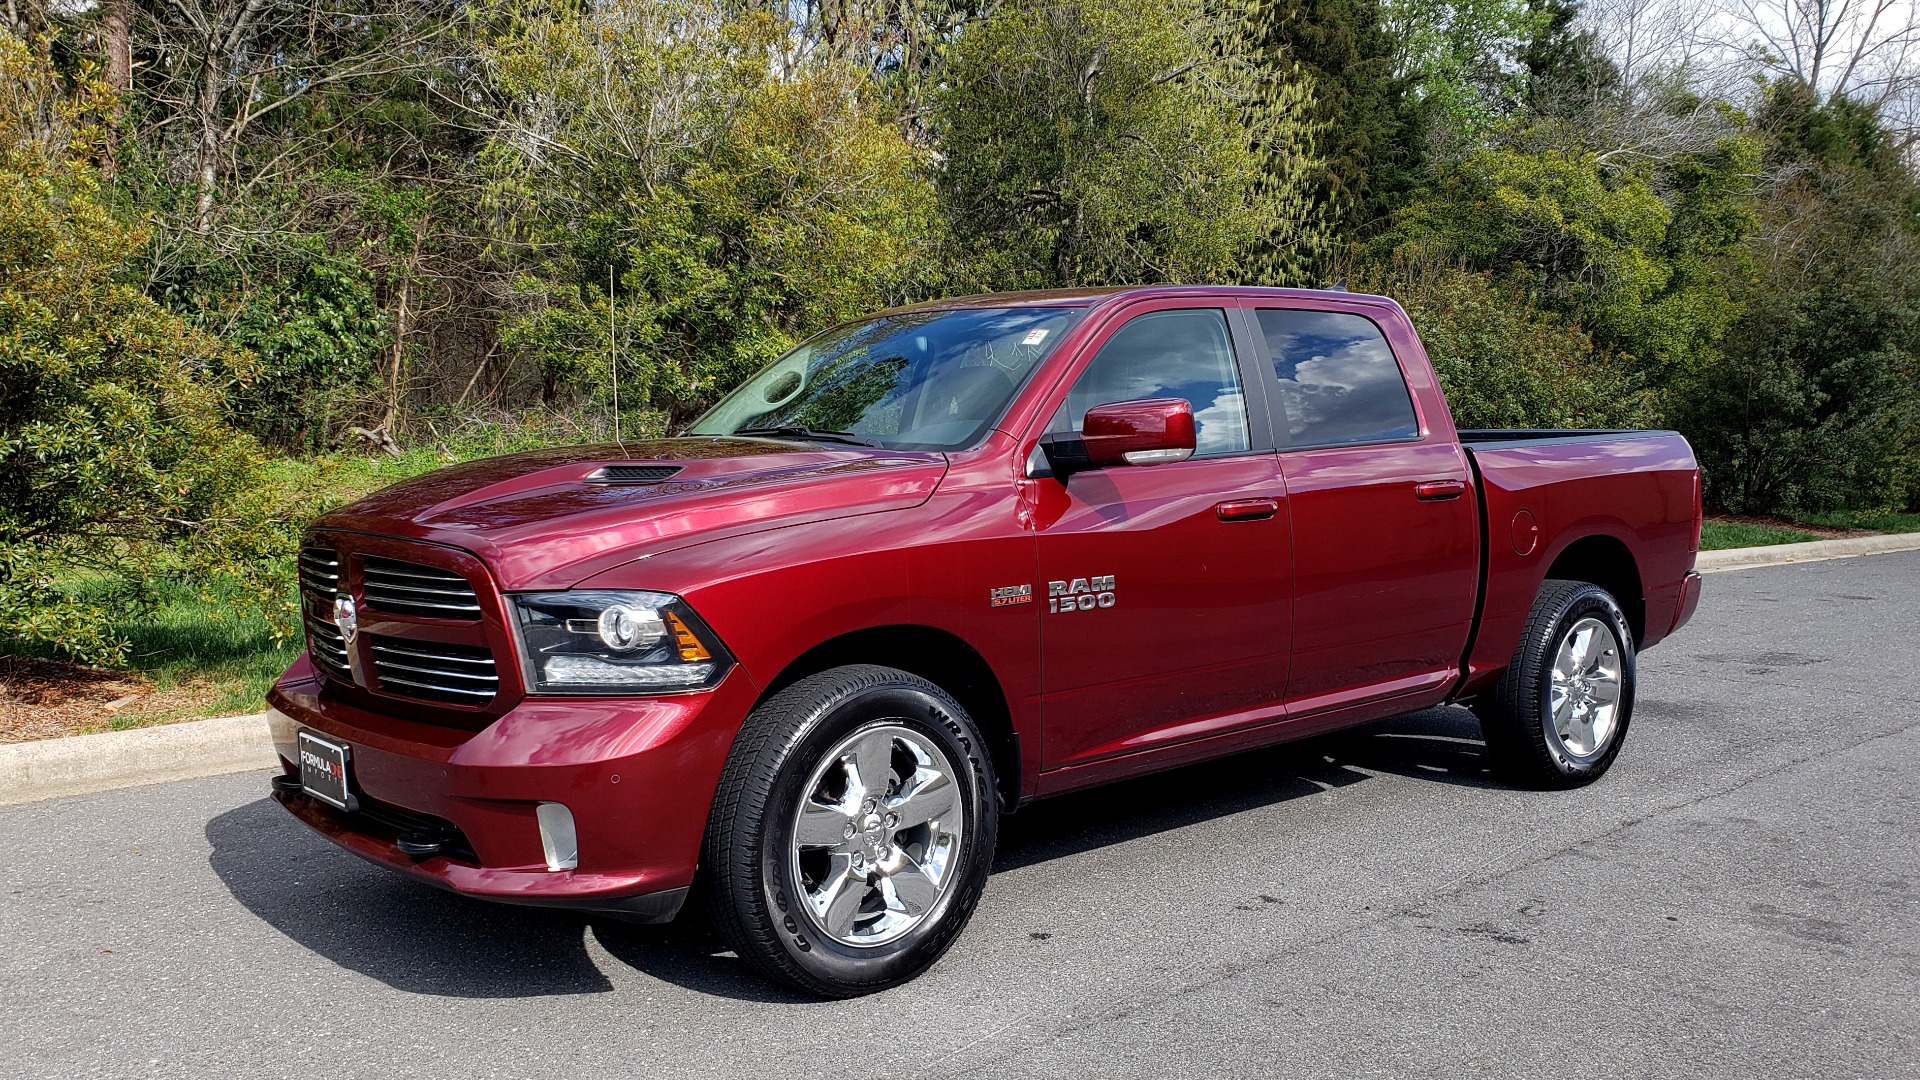 Used 2017 Ram 1500 SPORT CREW CAB 4X4 / NAV / ALPINE / SUNROOF / VENT STS / REARVIEW for sale Sold at Formula Imports in Charlotte NC 28227 1